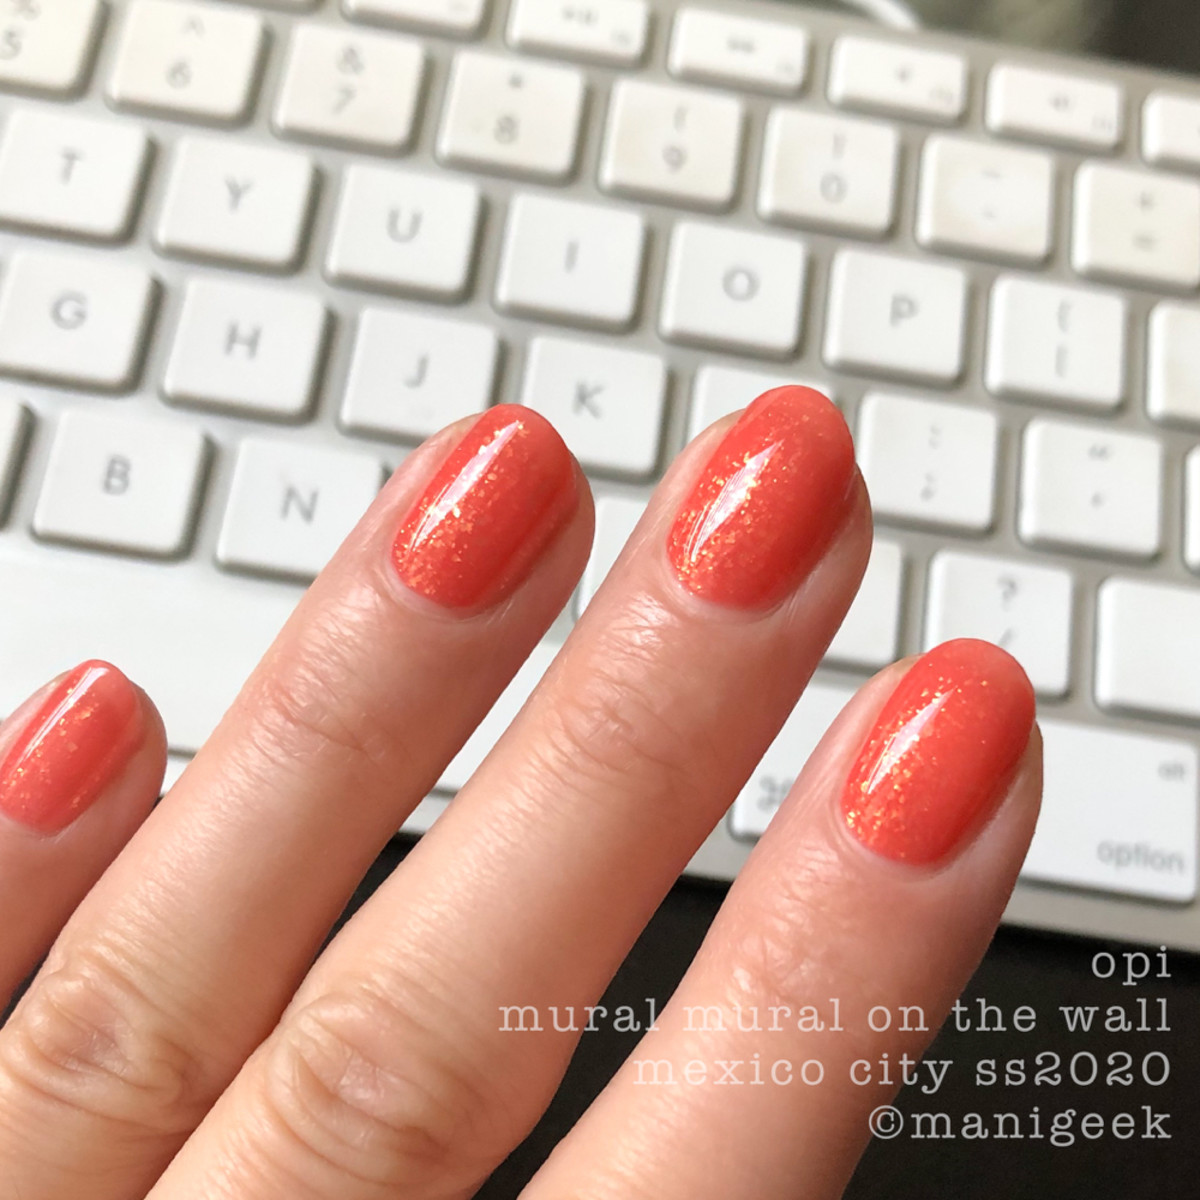 OPI Mural Mural on the Wall - OPI Mexico City Swatches Review 2020